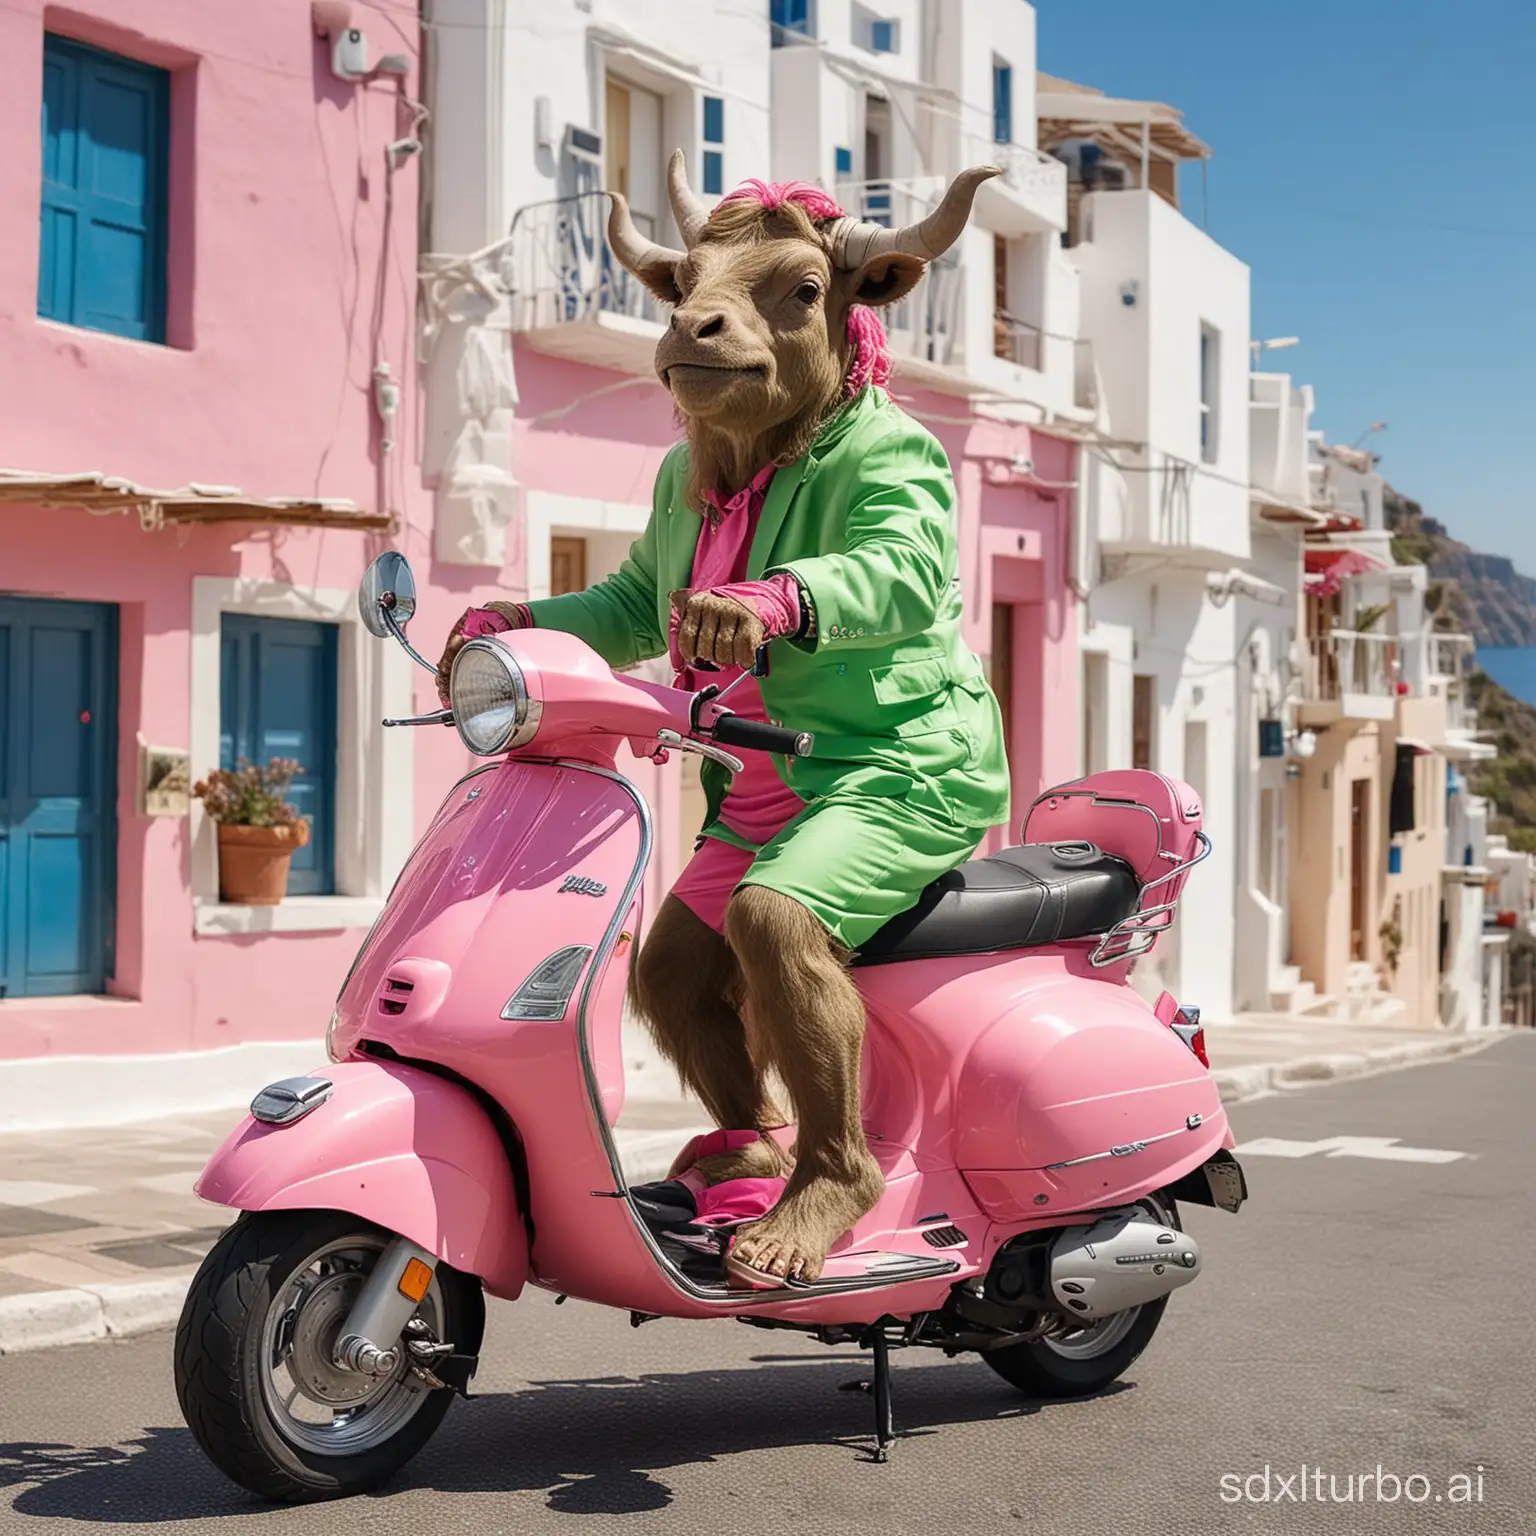 two meter minotaur monster dressed in a green suit juggling on a pink Vespa GTS 300, side shot of the Vespa, The minotaur looks at the camera, the pink Vespa GTS 300 is in motion, background located in Santorini greece,